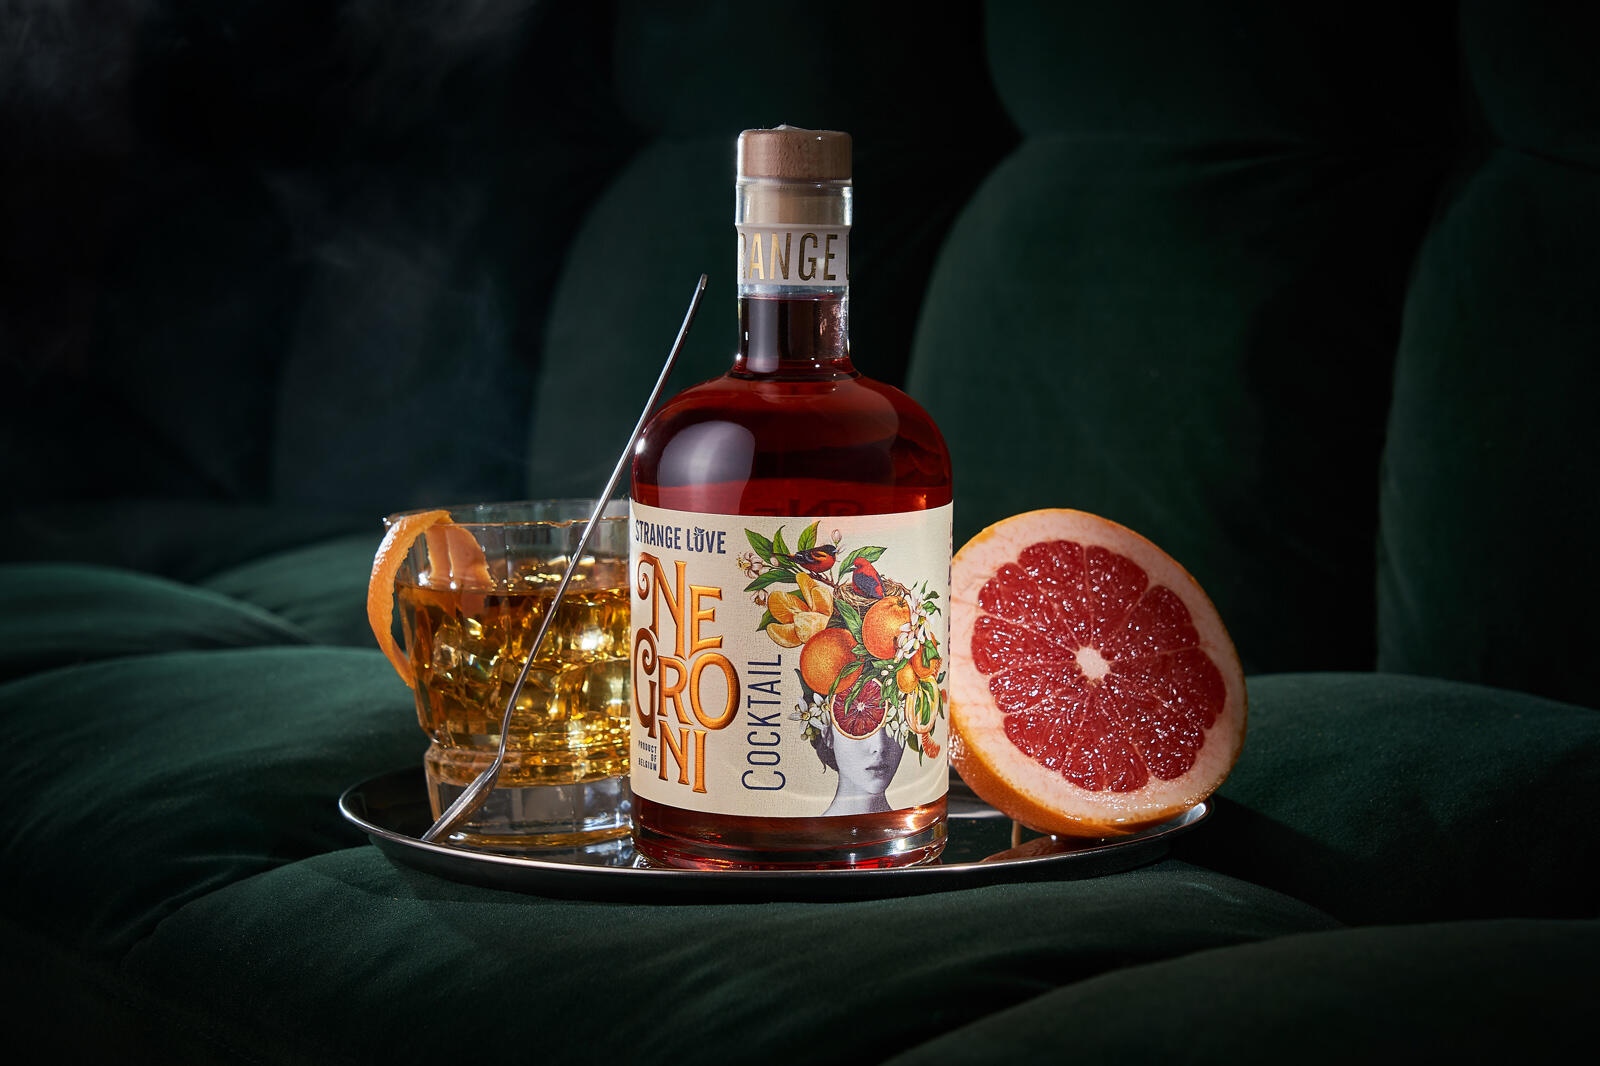 Sodiko's Development and Design of Ready-to-Drink Negroni Cocktail with Strange Luve Gin Series